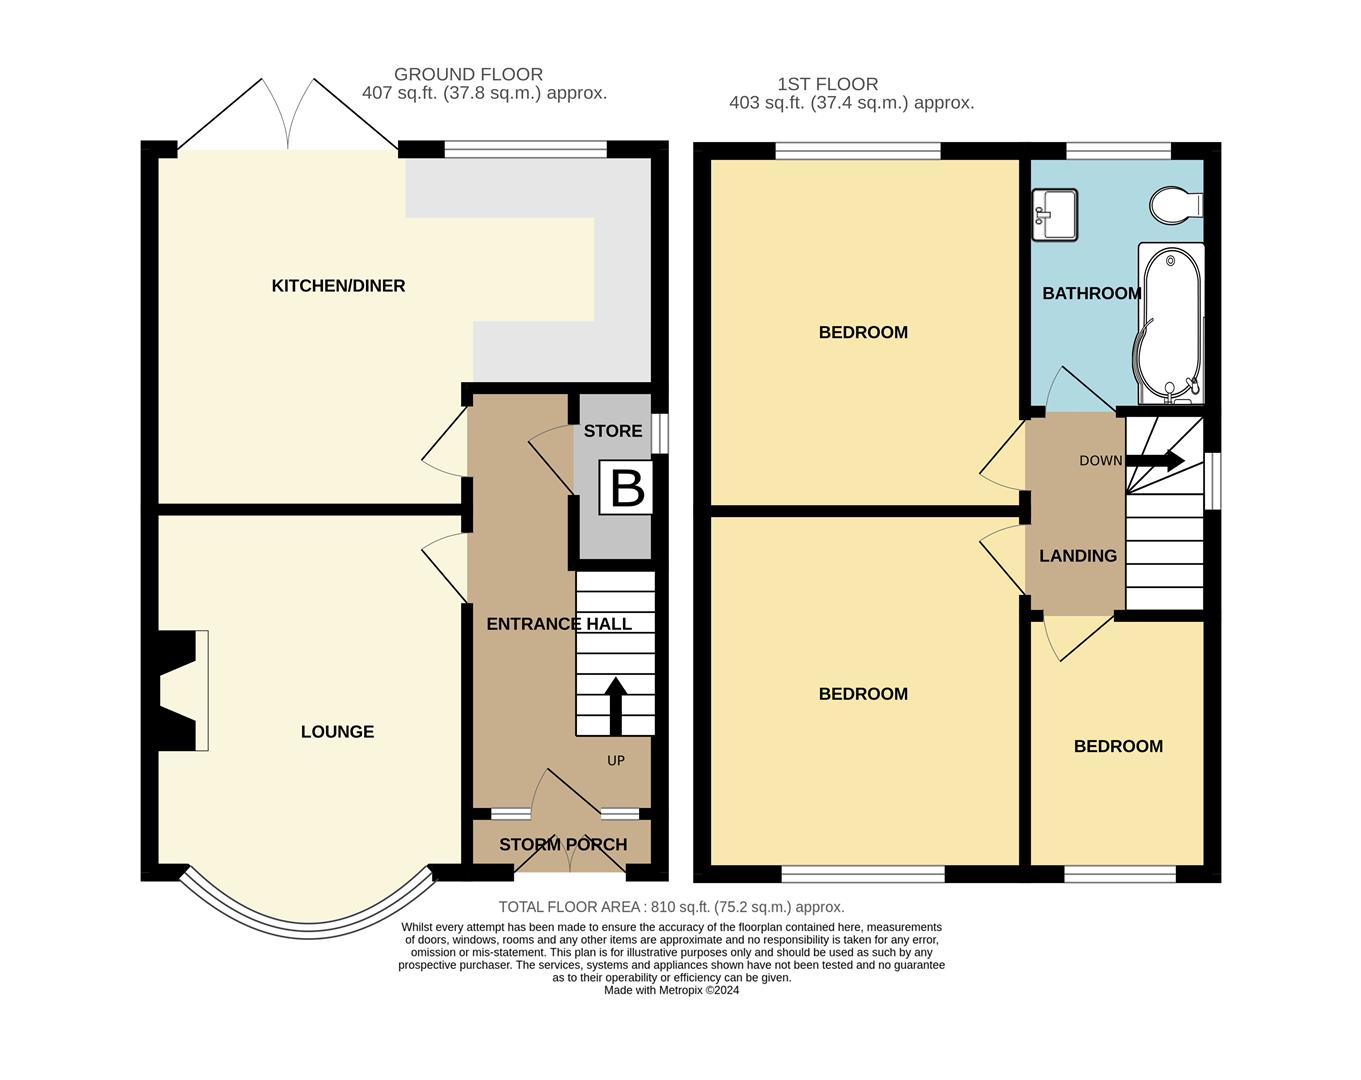 3 bed semi-detached house for sale - Property floorplan